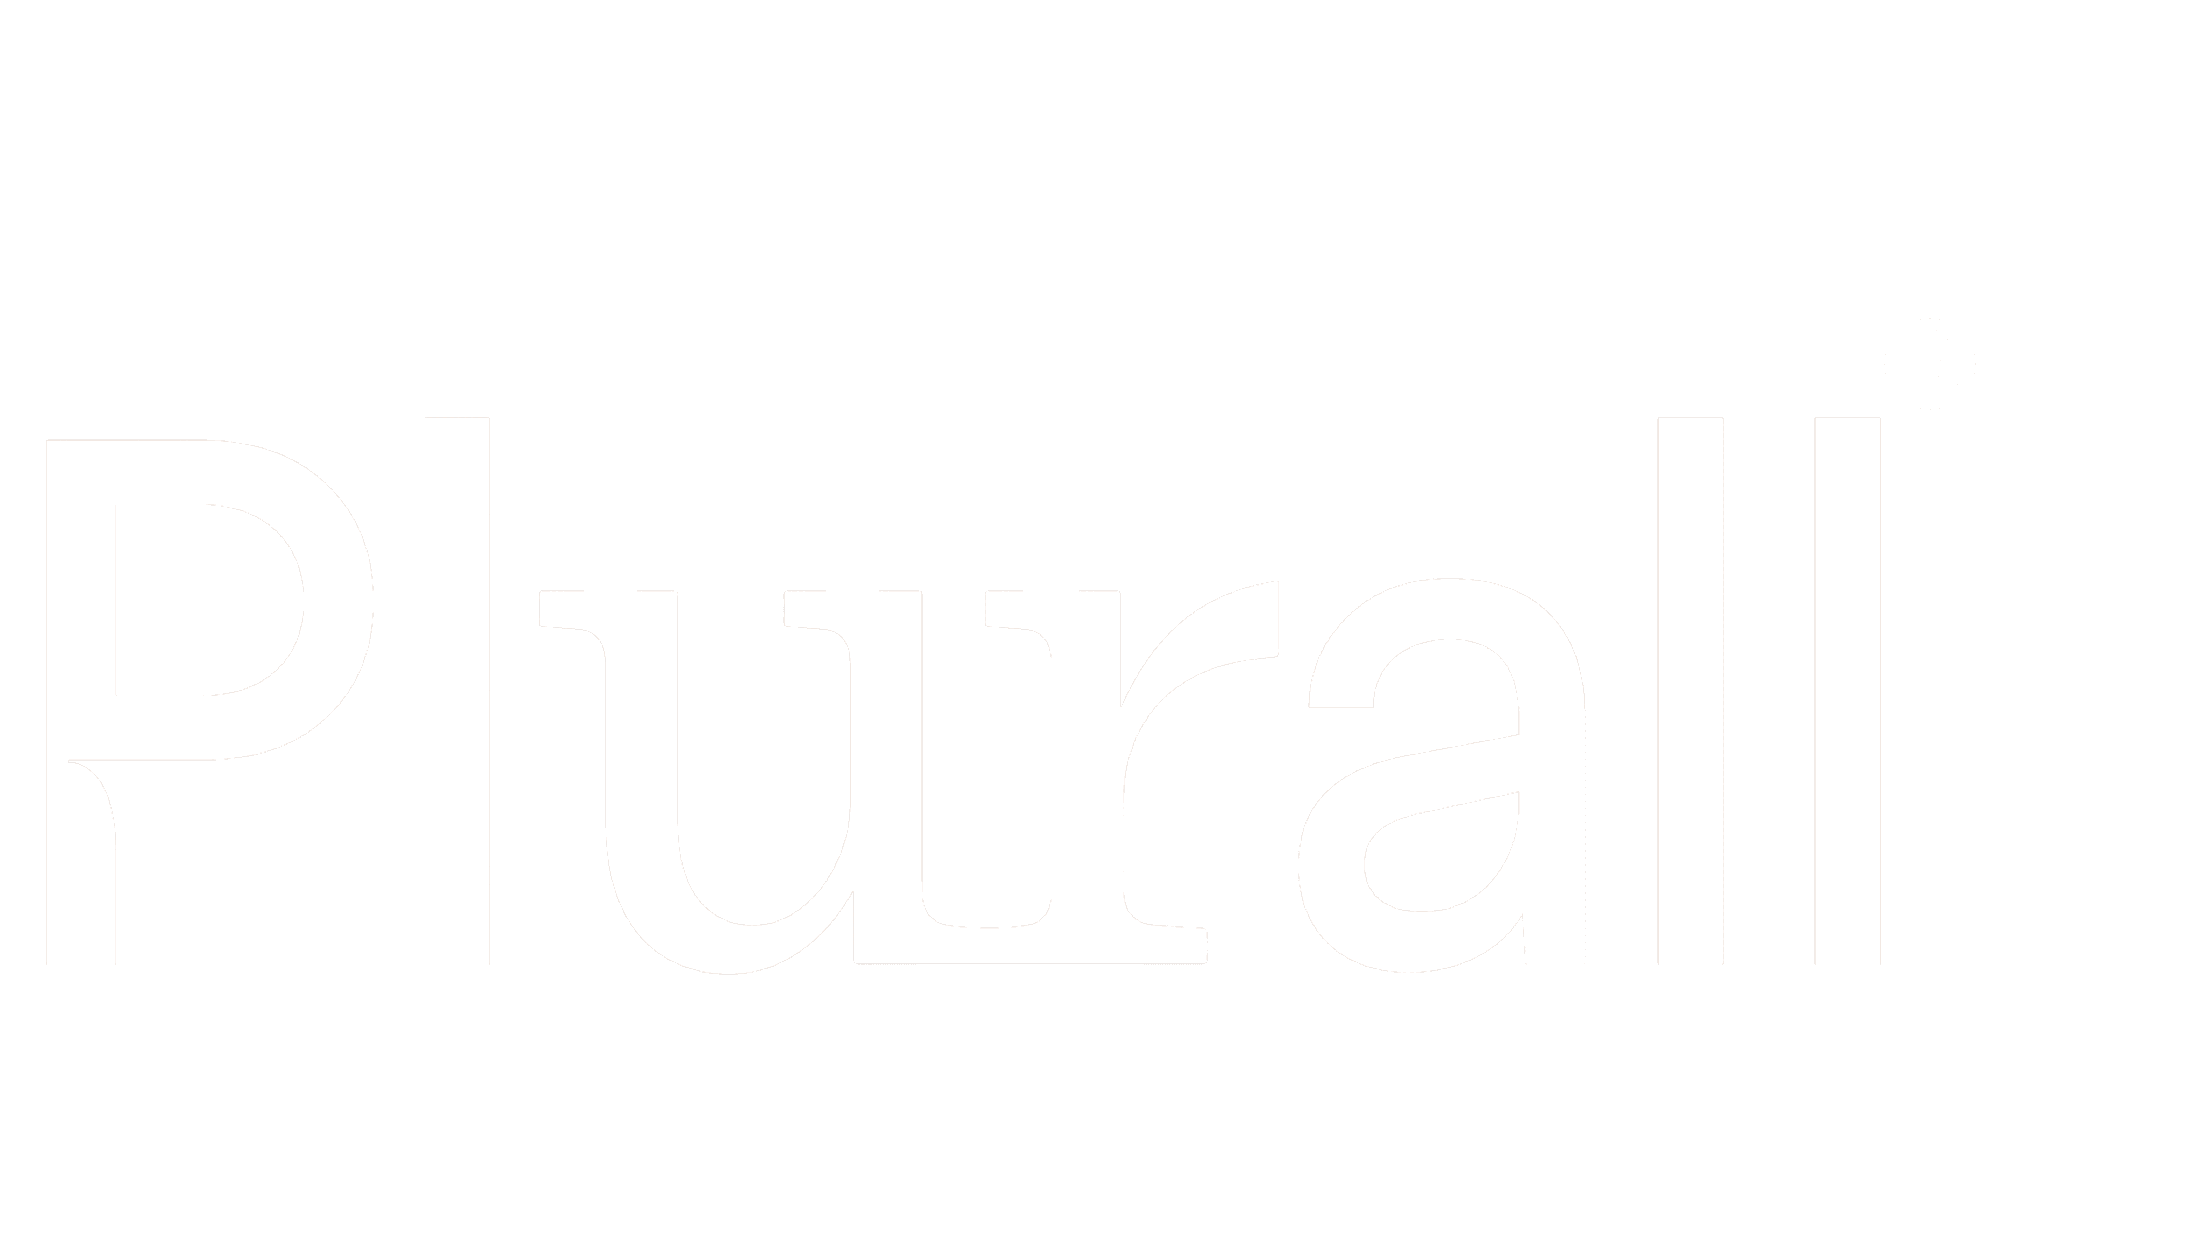 Krealo invests in Plurall, the innovative Colombian fintech focused on financial inclusion